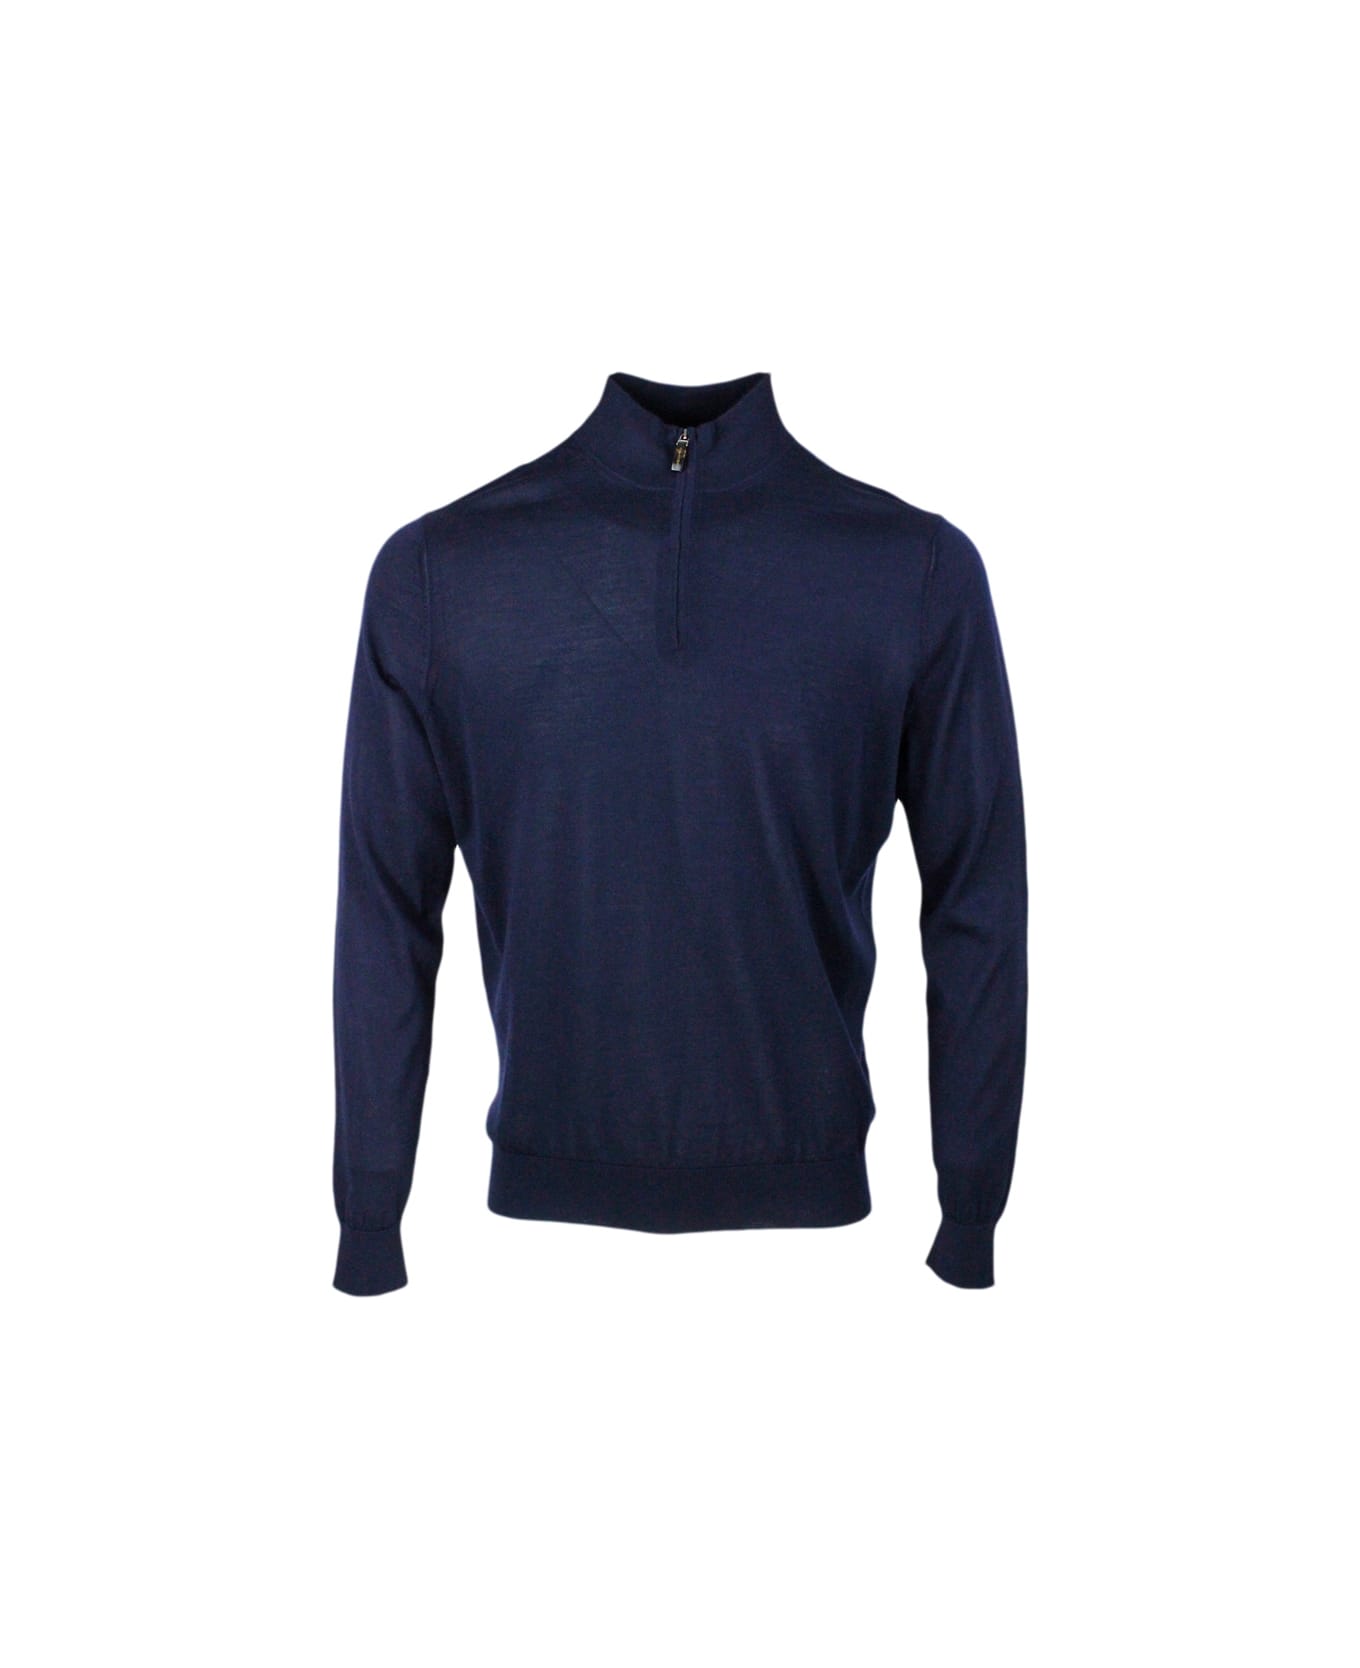 Colombo Light Half-zip Long-sleeved Sweater In Fine 100% Cashmere And Silk With Special Processing On The Profile Of The Neck - Blu navy